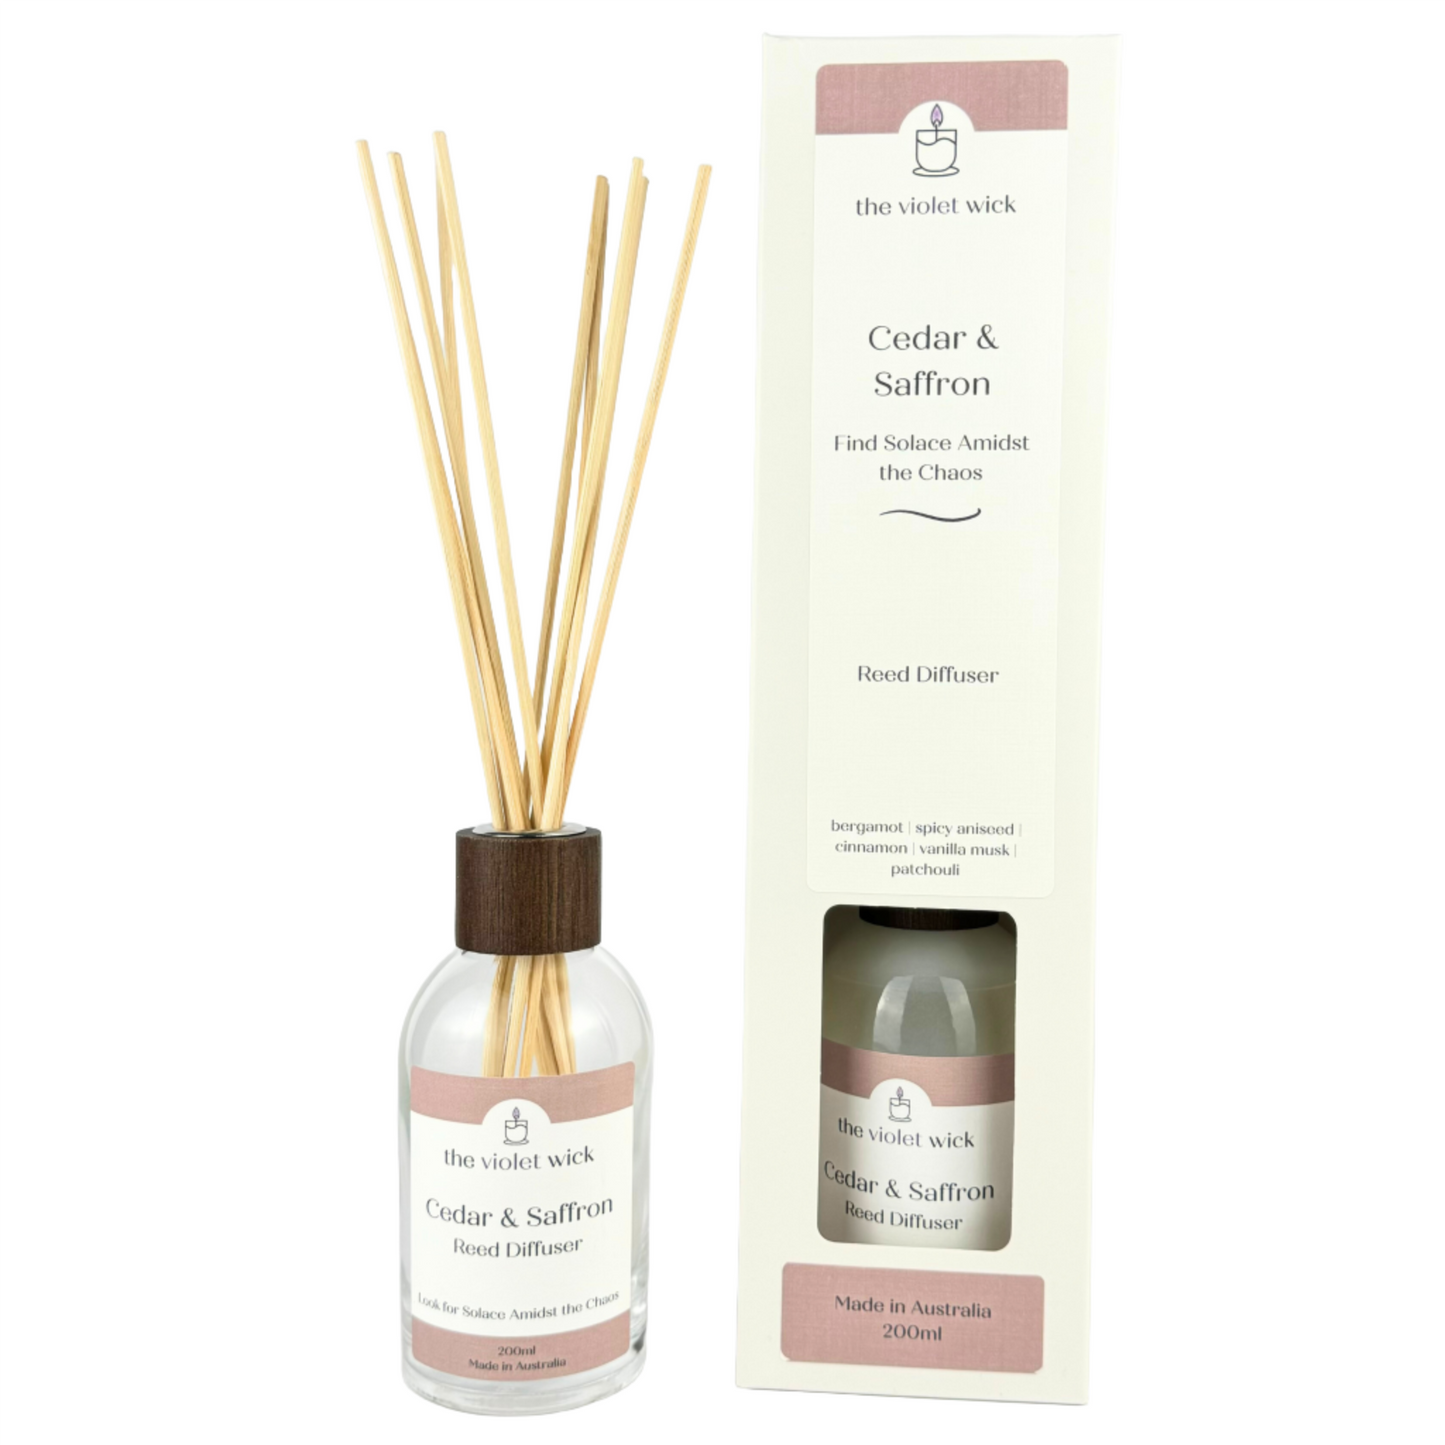 Cedar & Saffron reed diffuser from The Violet Wick